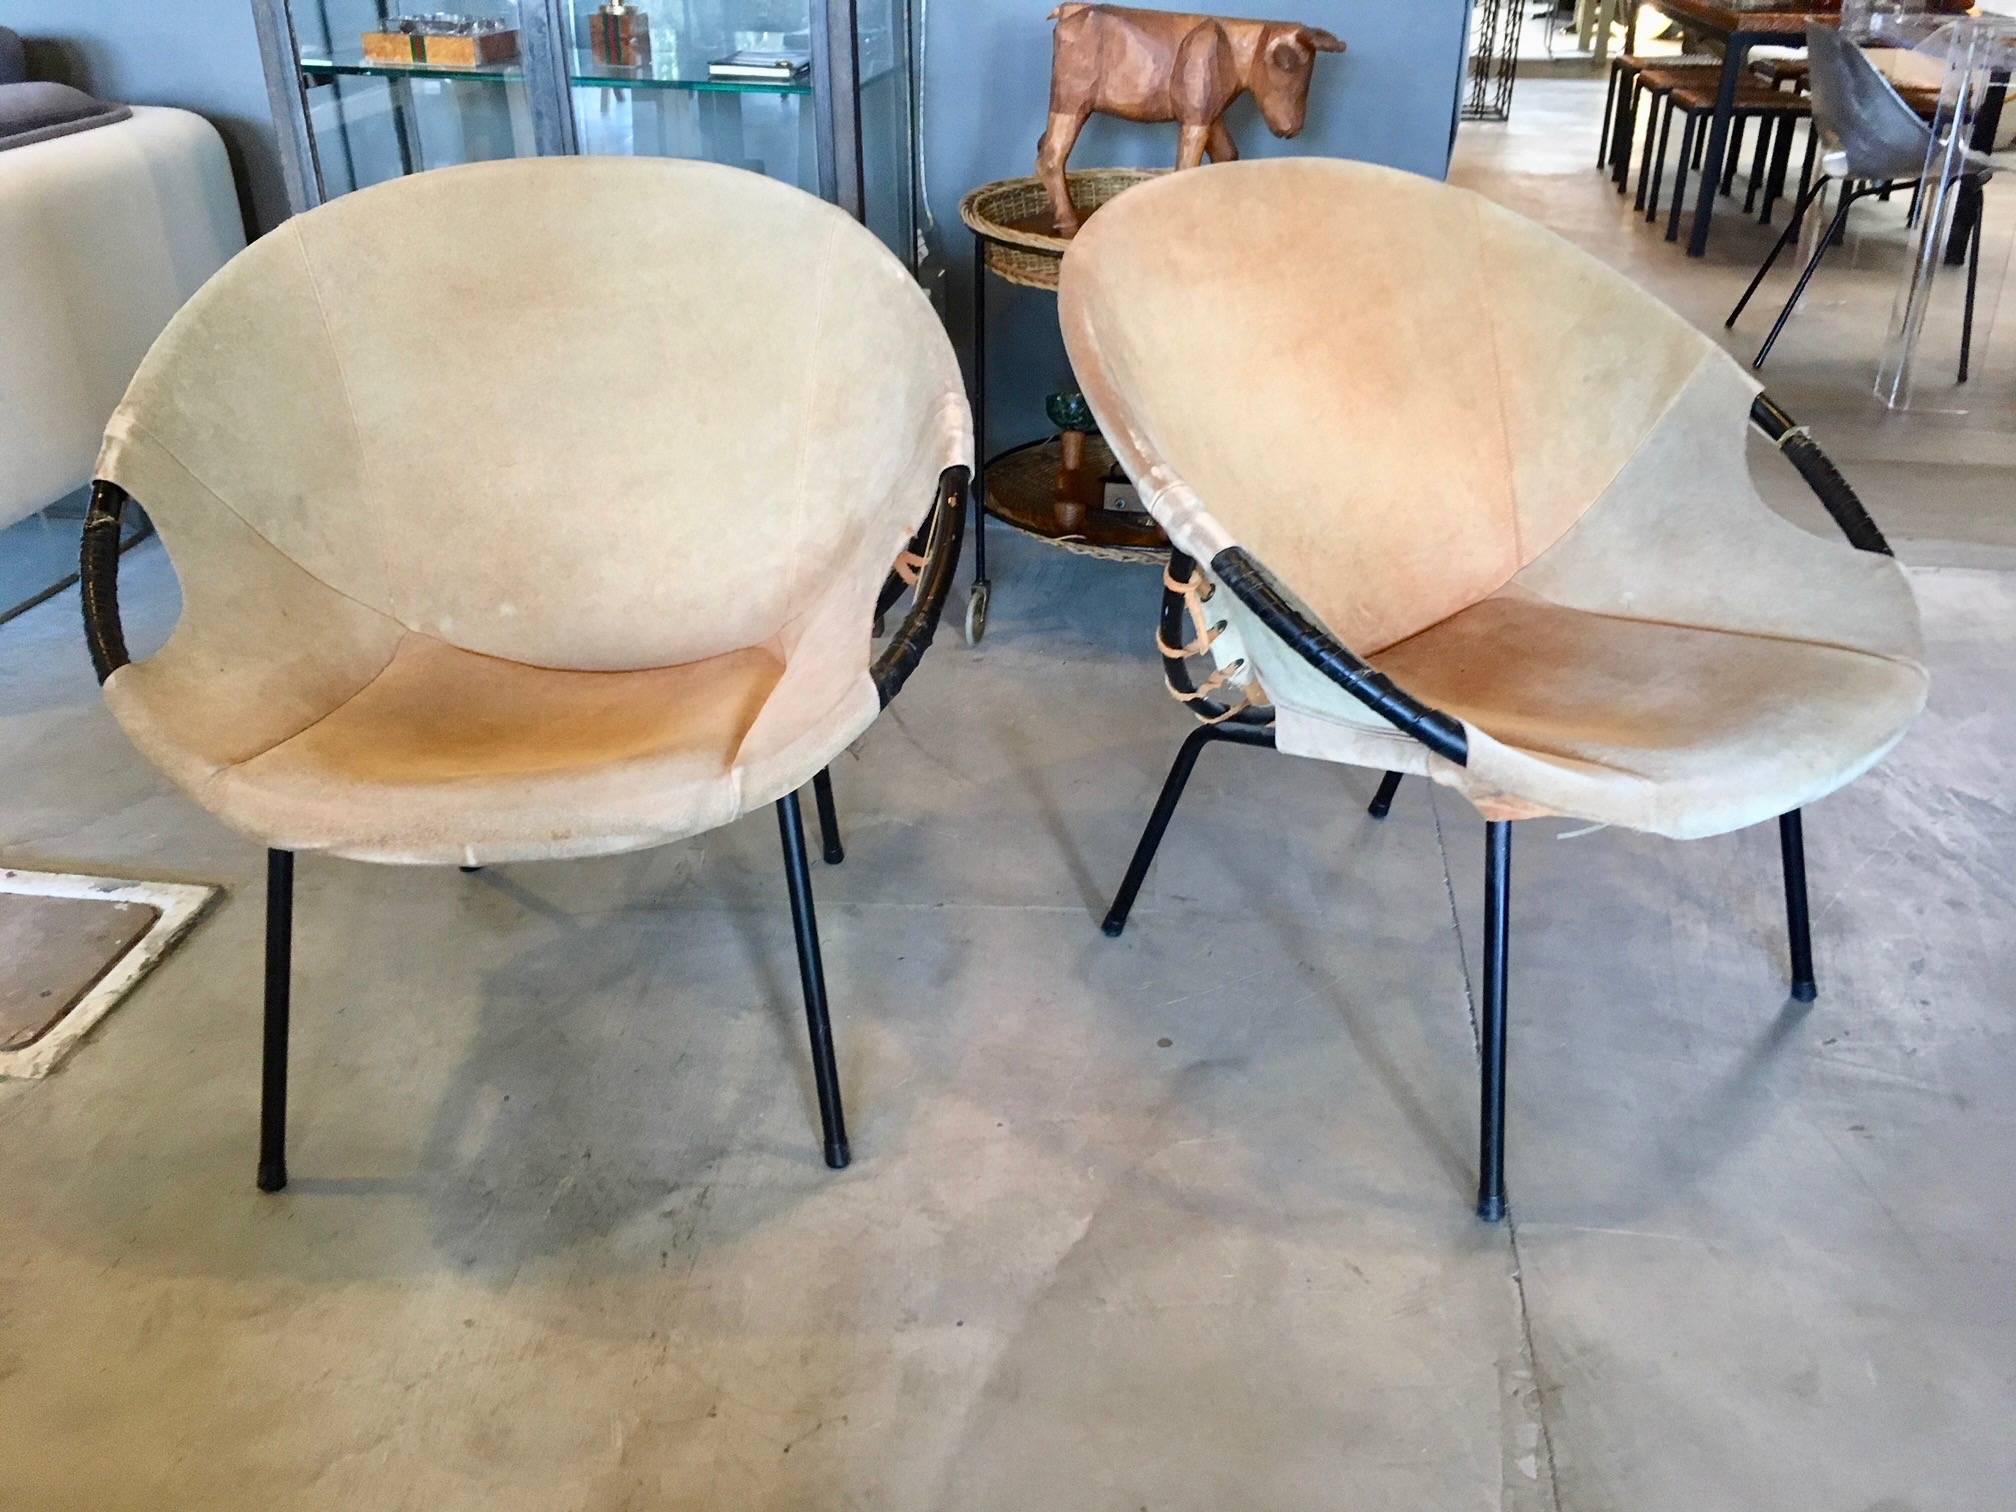 Gorgeous pair of suede scoop chairs. Metal frame with wrapped arms and suede seat. Classic design. Good vintage condition. Hard to find a matching pair. Extremely comfortable.

Two single chairs available in separate listings. One red, one